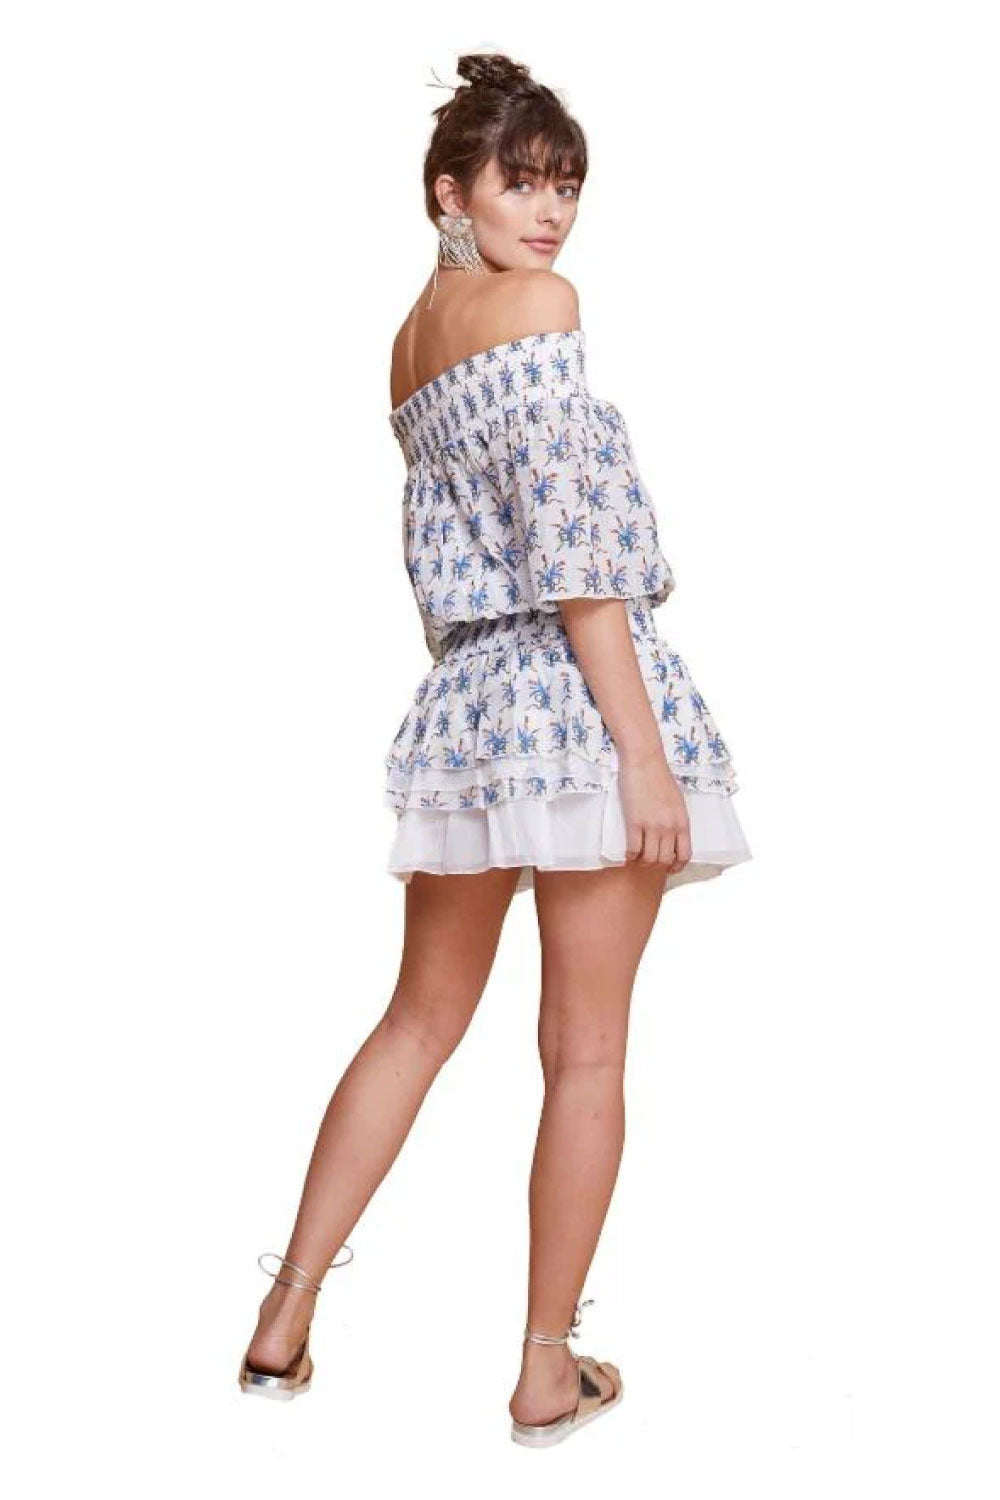 Image of the back of Guadalupe Design's Anais Mini Dress in Blue and White on a model.